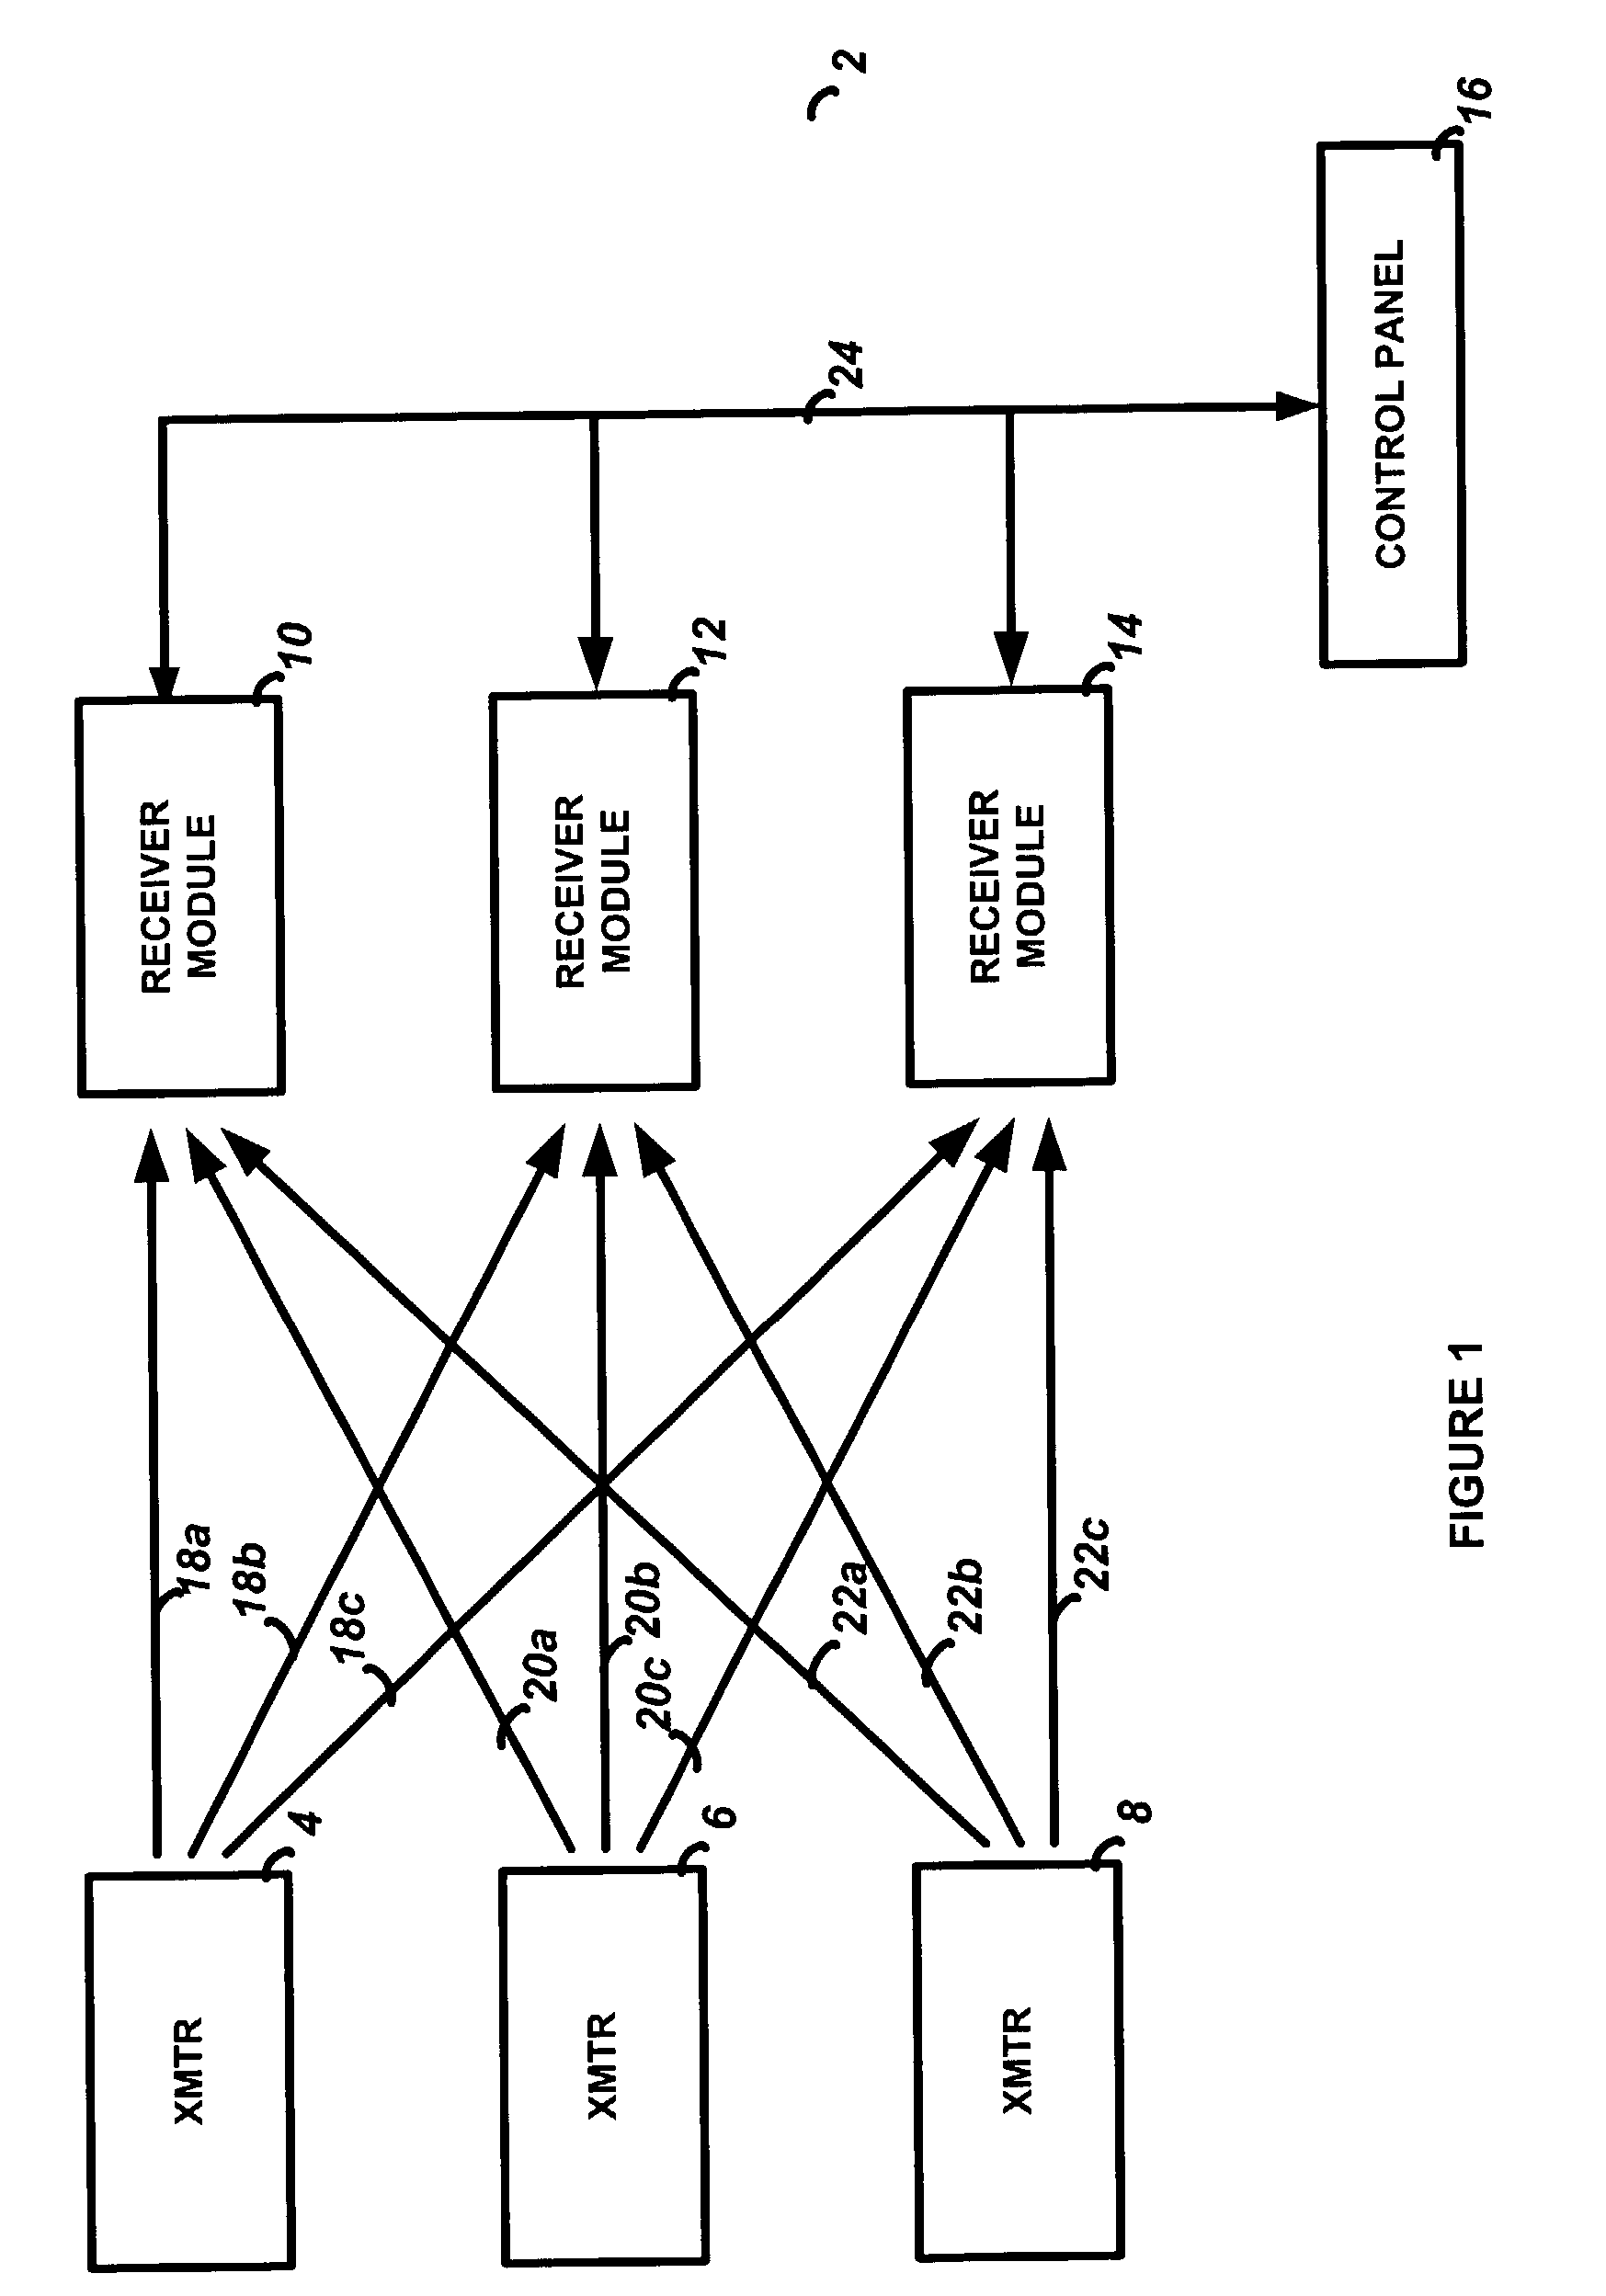 Method and apparatus for determining message response type in a security system